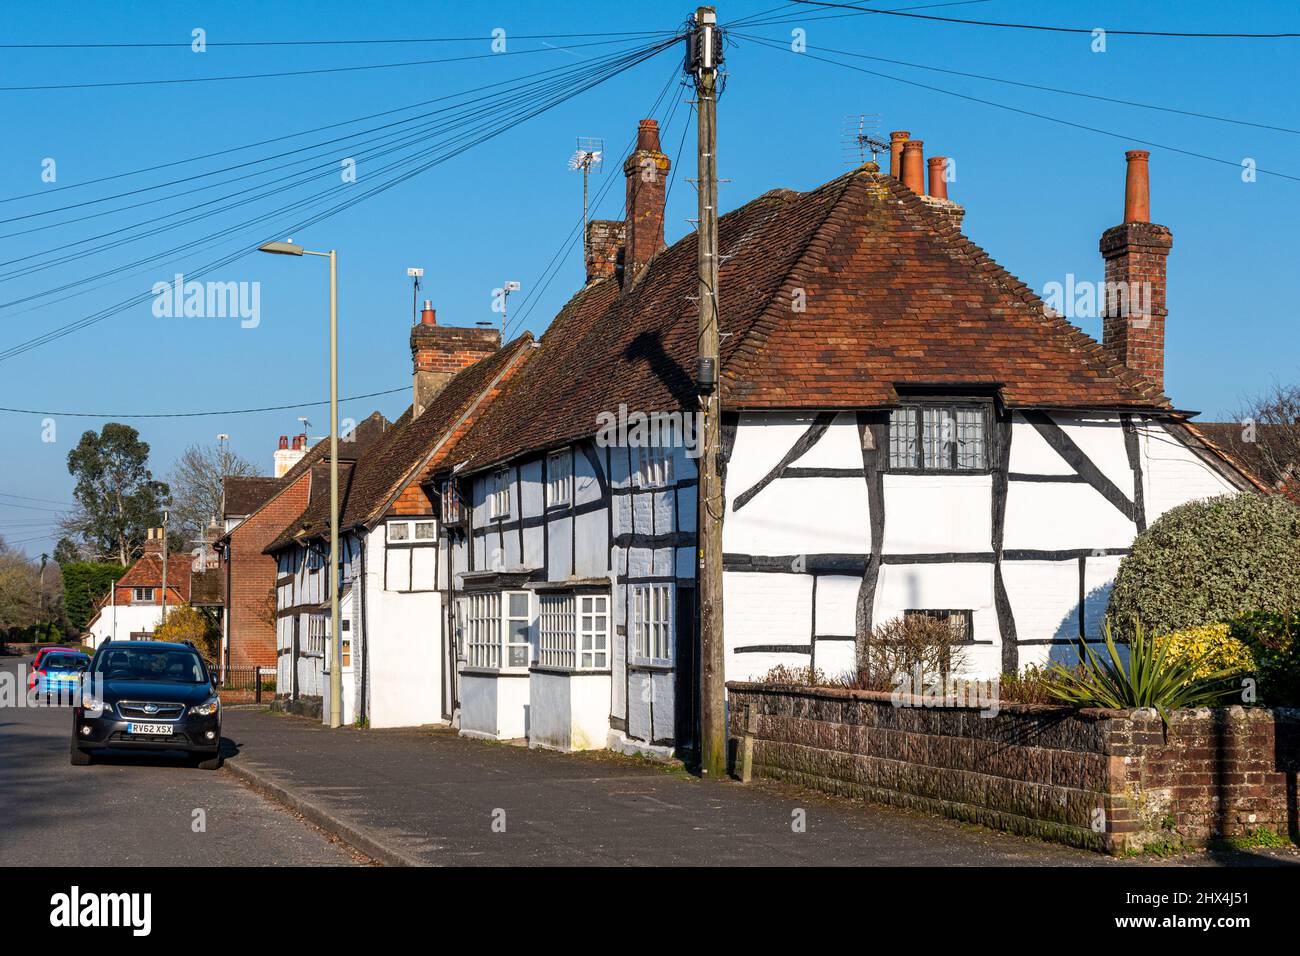 Houses in Holybourne, a pretty Hampshire village, England, UK, on a sunny spring day with blue sky Stock Photo